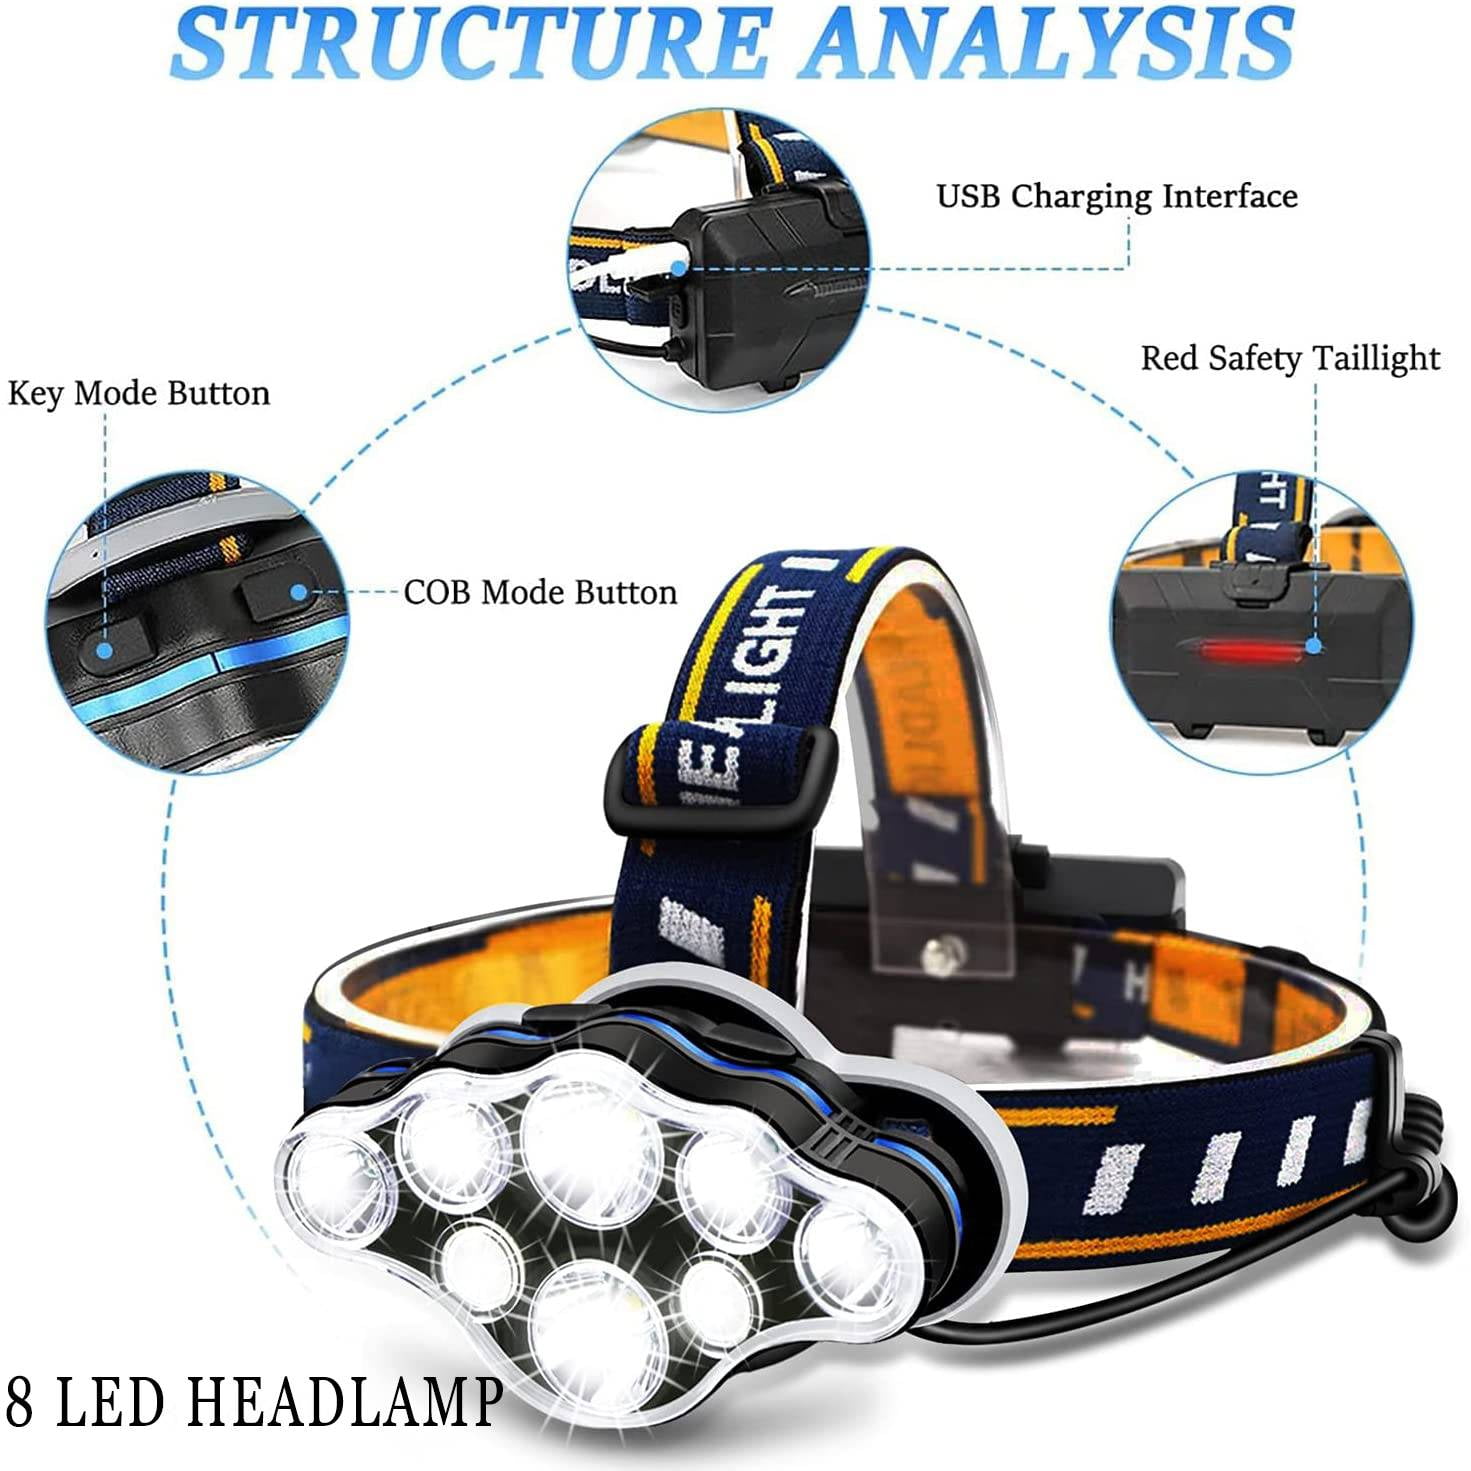 Details about   990000LM Headlamp LED USB Rechargeable Waterproof 8Modes Headlight & Battery 